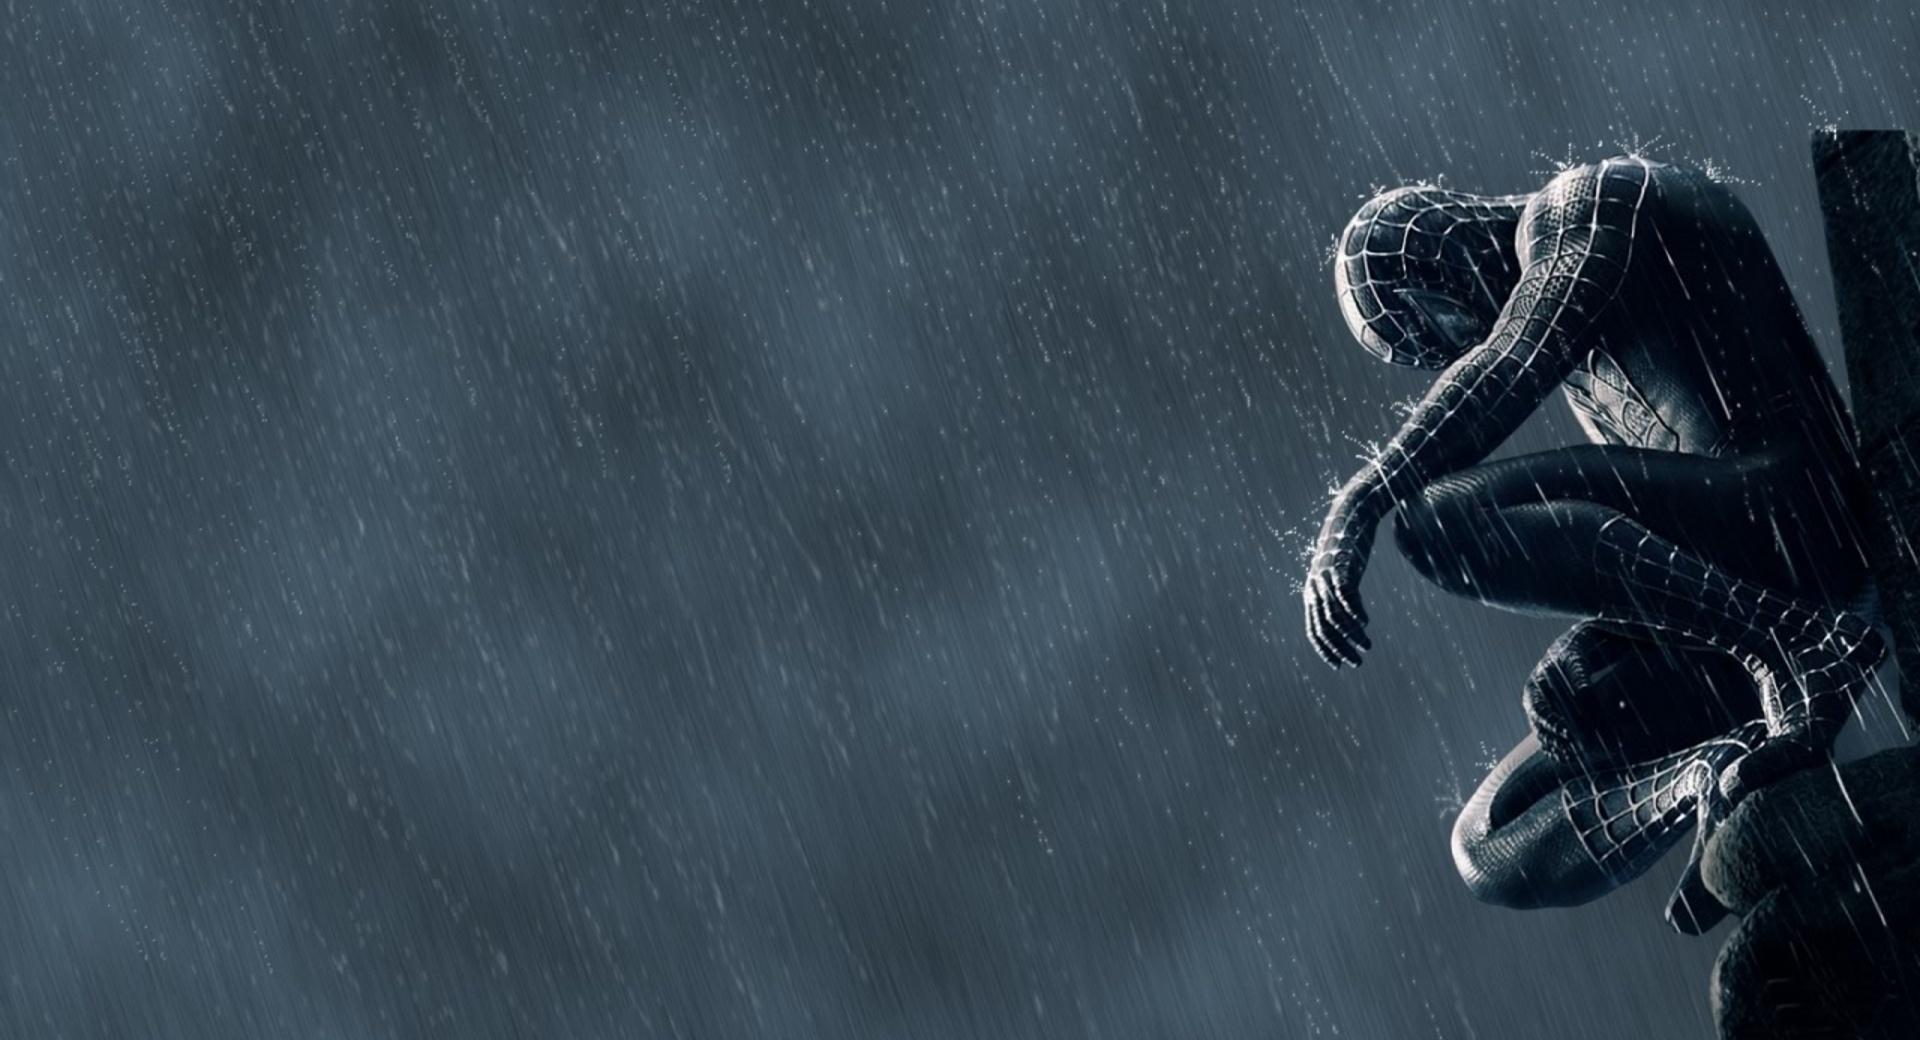 Spider Man In The Rain wallpapers HD quality